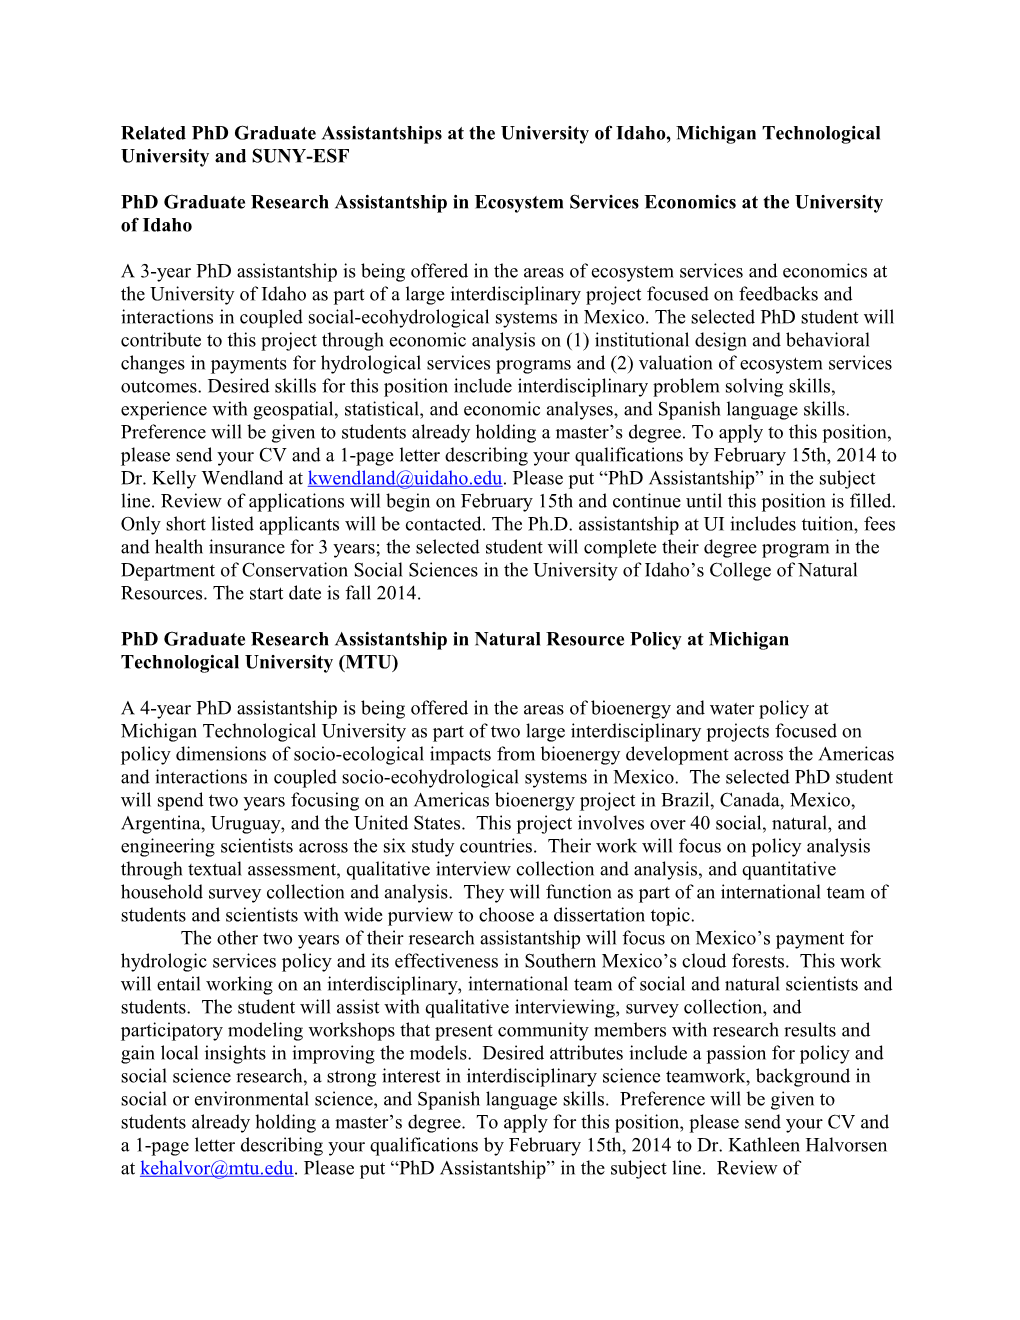 Phd Graduate Research Assistantship in Ecosystem Services Economics at the University of Idaho